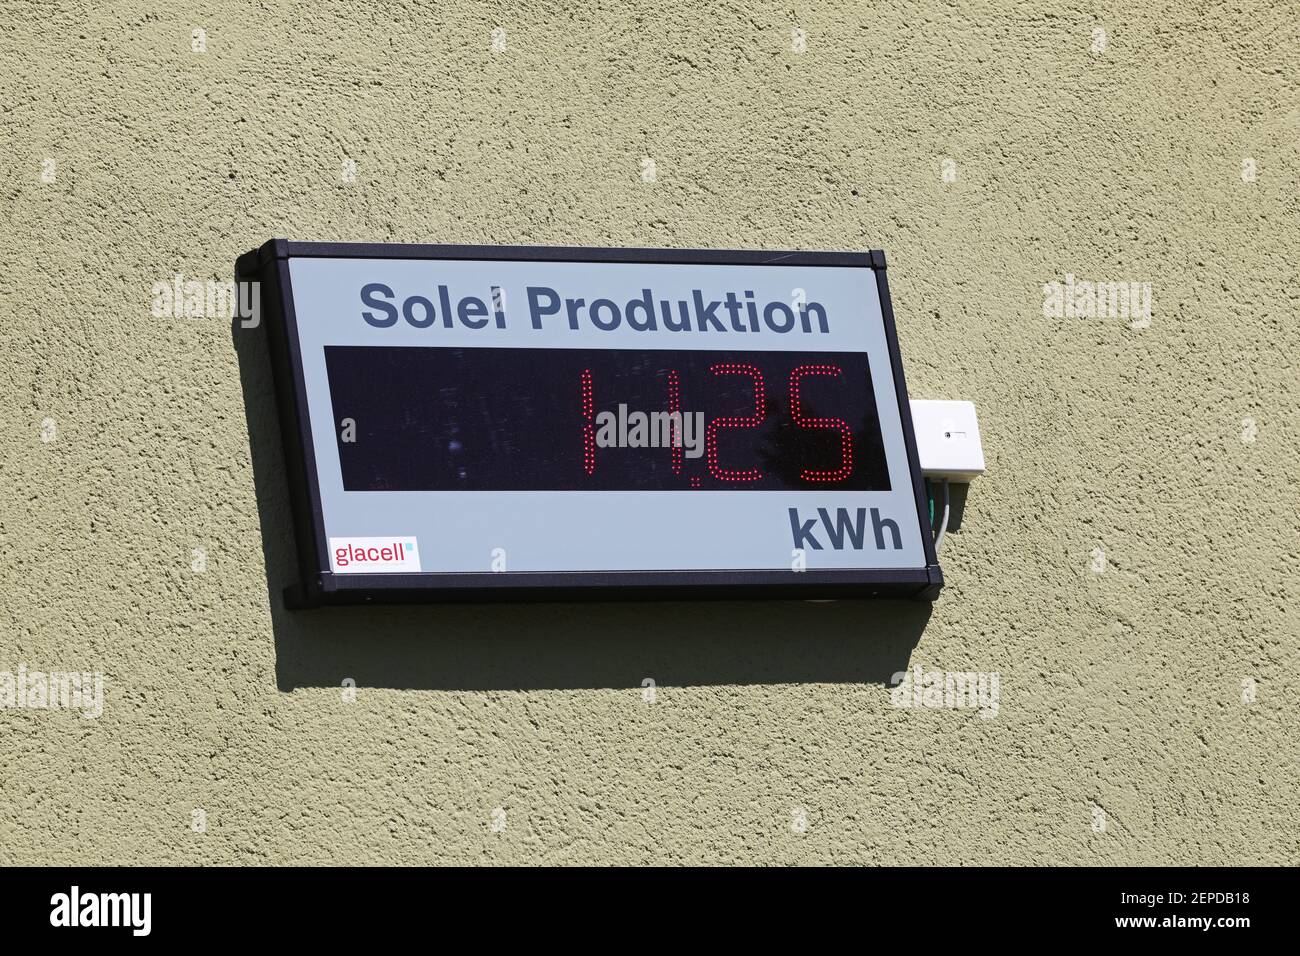 MOTALA, SWEDEN- 24 MAY 2018: Sign on a facade that indicates kWh on a solar panel system. Stock Photo